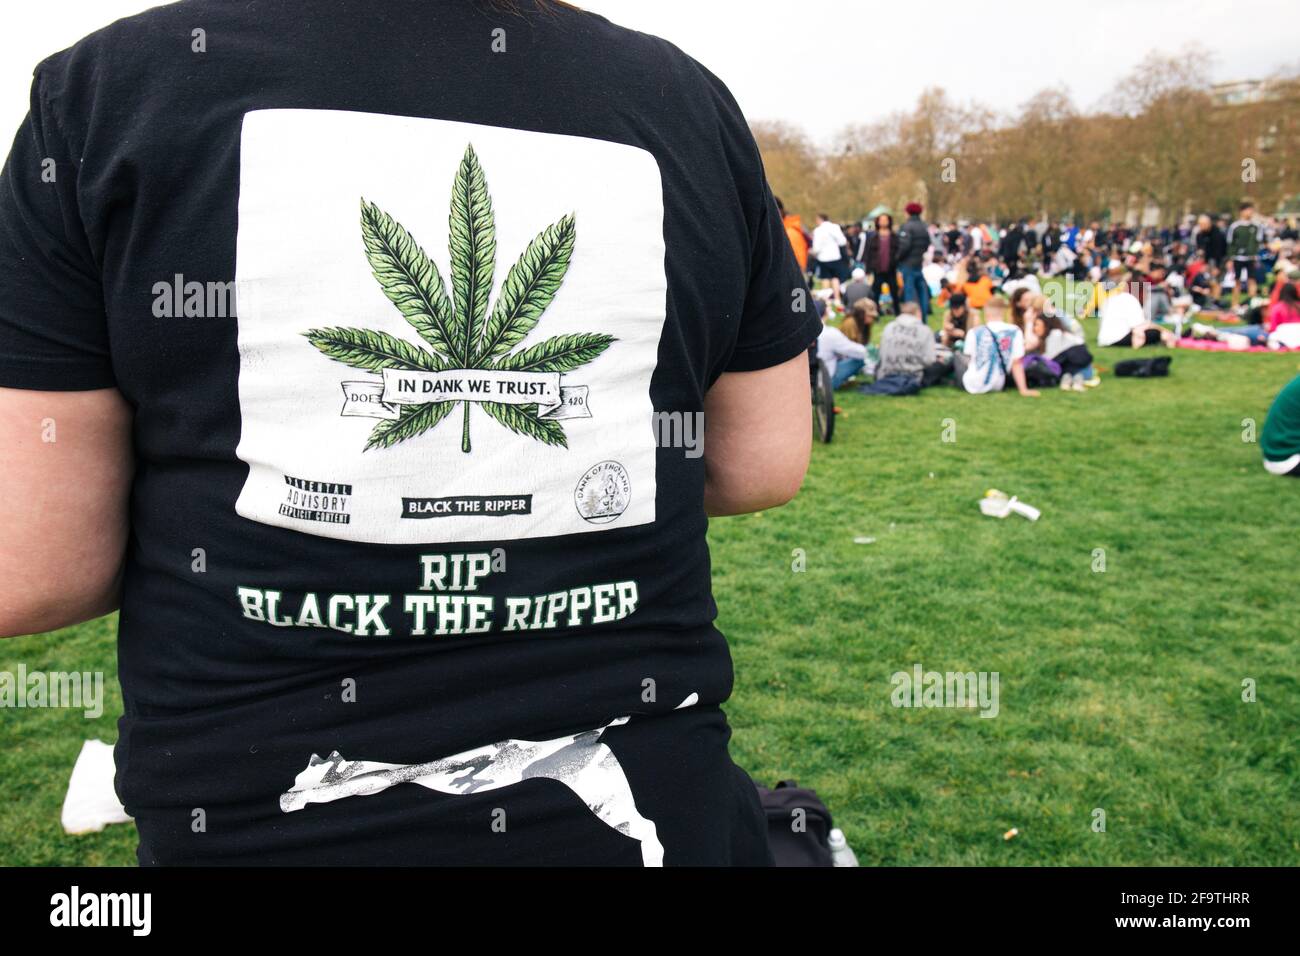 What is 420 Weed Day and is cannabis legal in the UK?